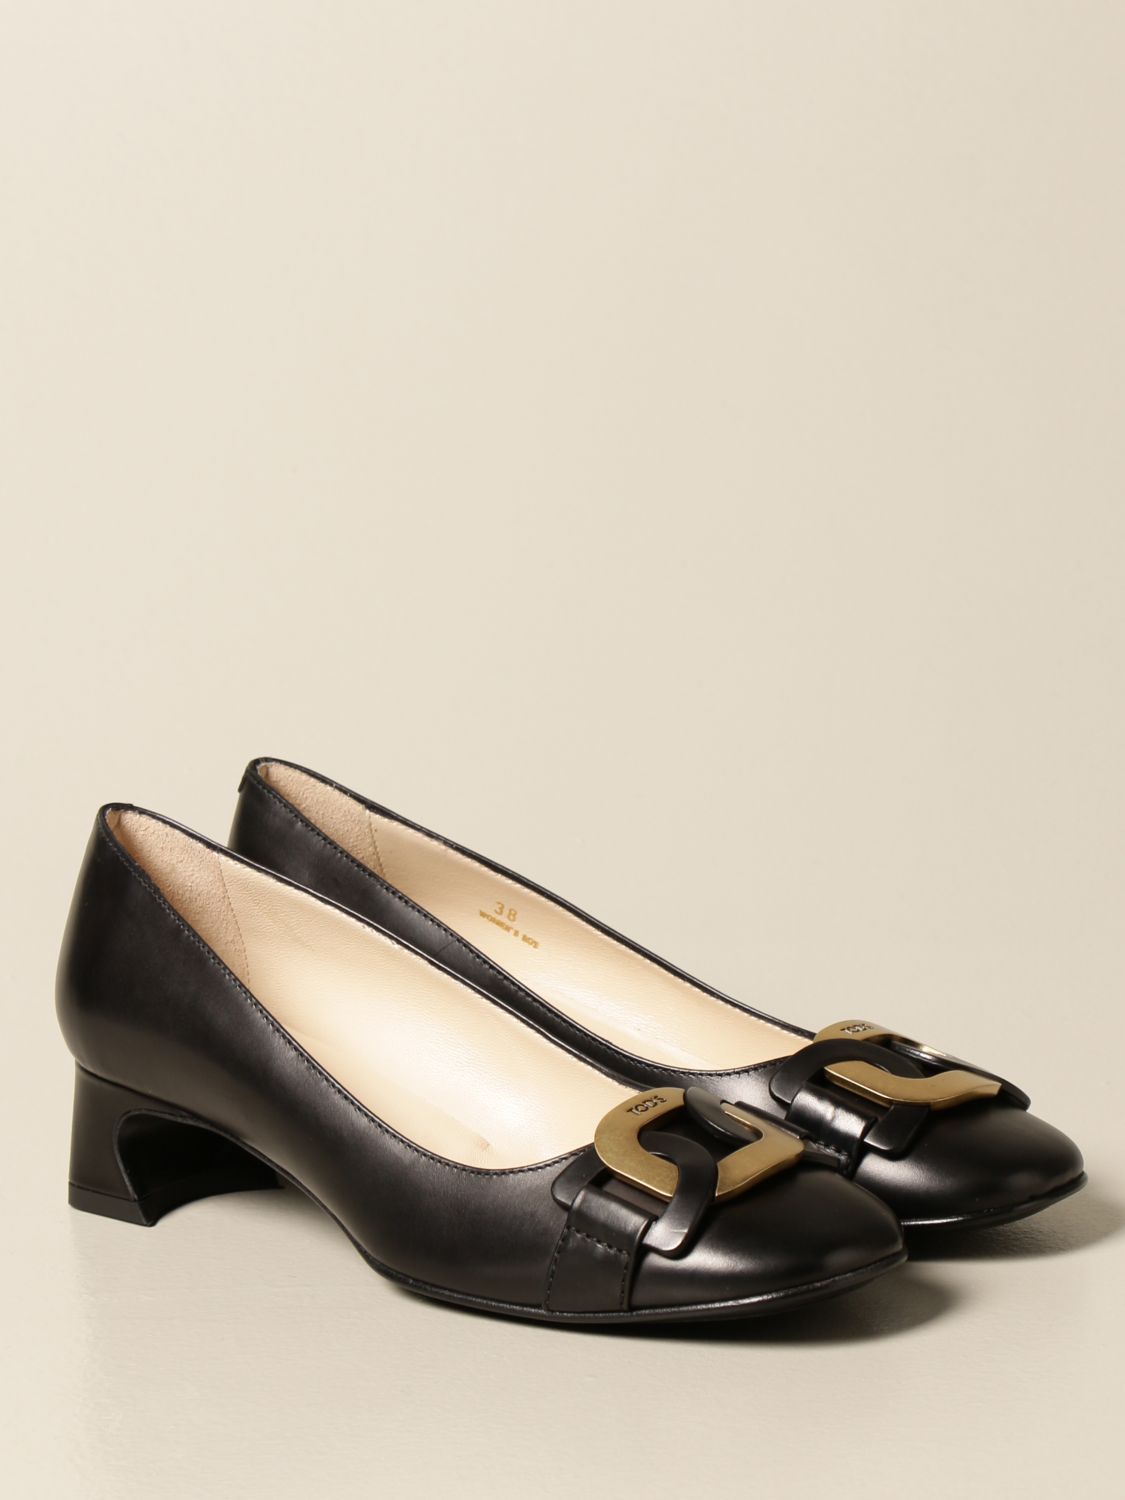 Tods Outlet: Ballerina Tod's in pelle con catena | Ballerine Tods Donna  Nero | Ballerine Tods XXW85C0EG00 NF5 GIGLIO.COM